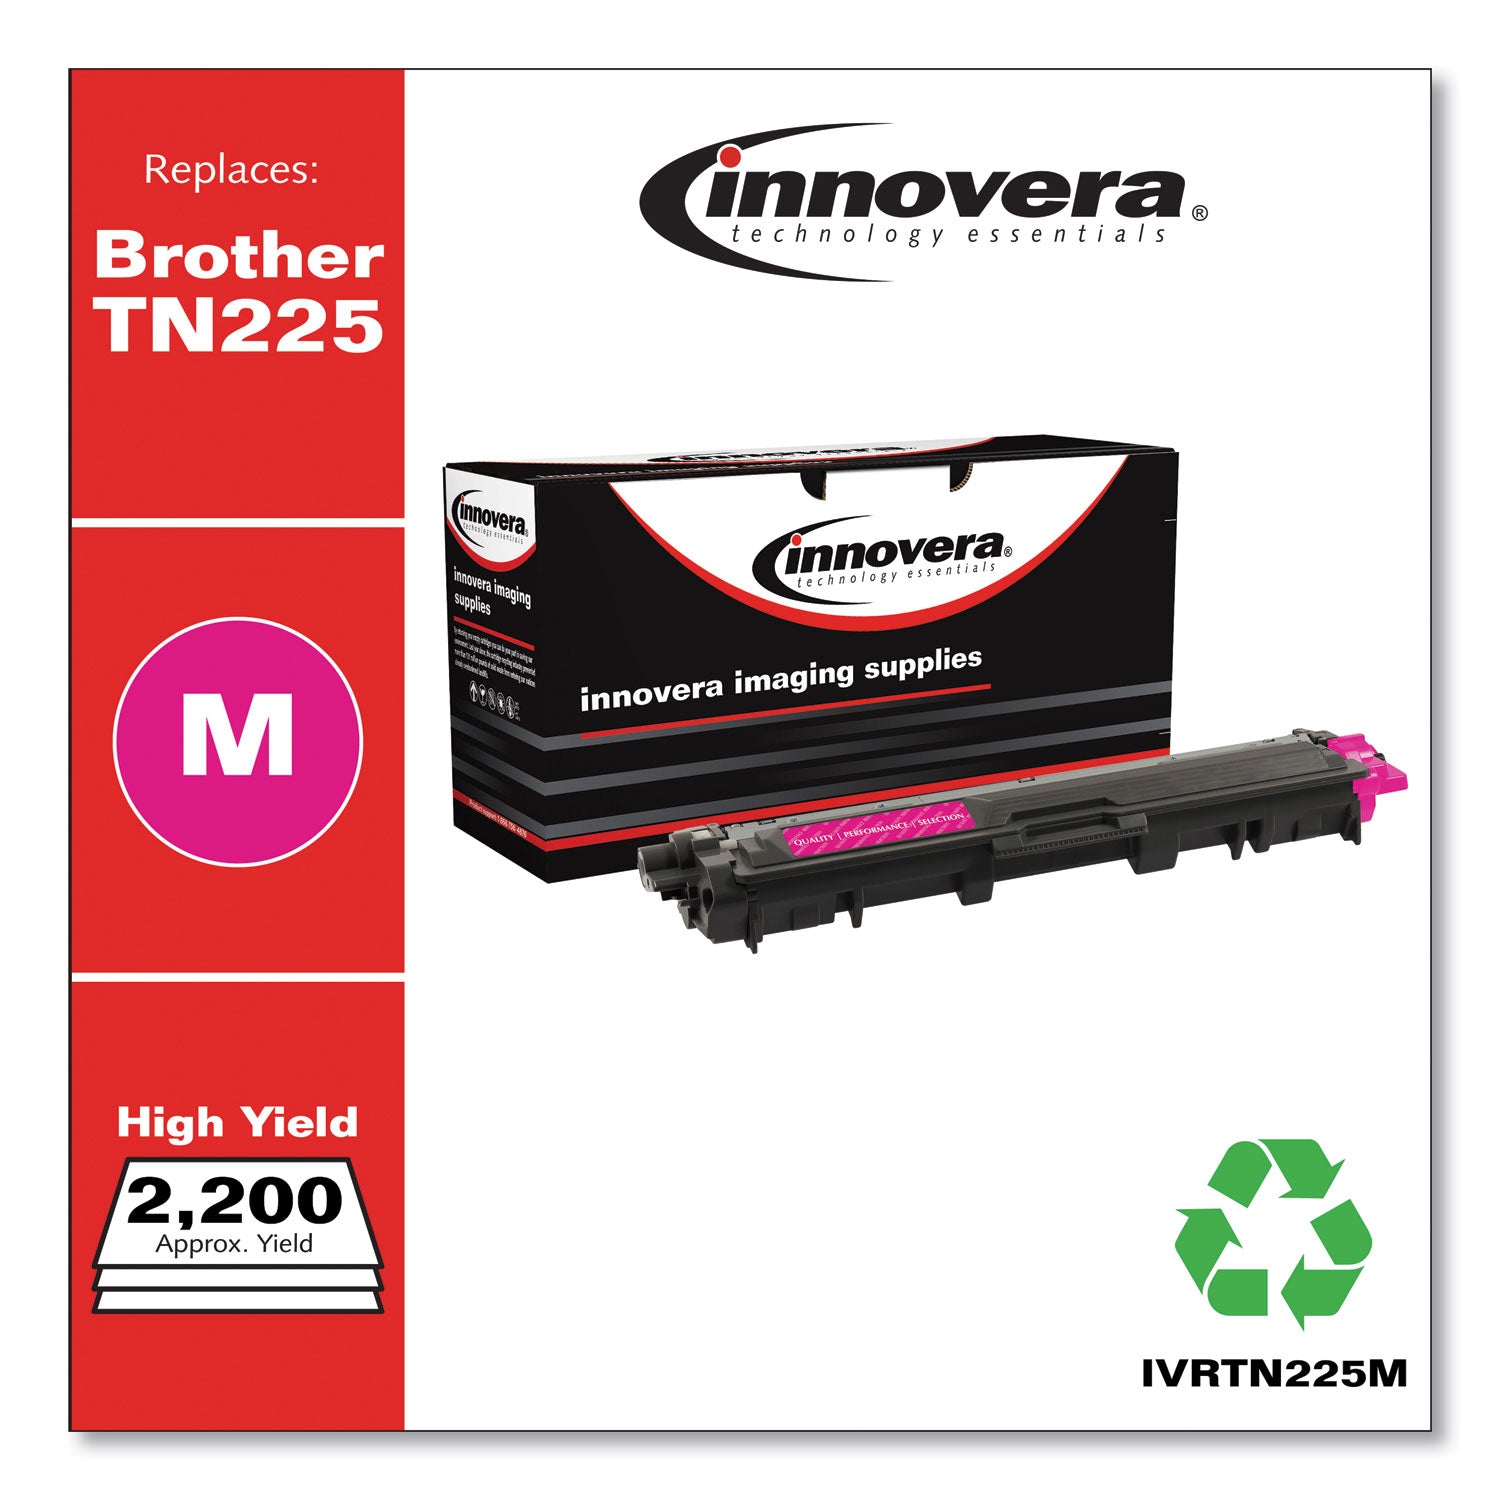 remanufactured-magenta-high-yield-toner-replacement-for-tn225m-2200-page-yield-ships-in-1-3-business-days_ivrtn225m - 2